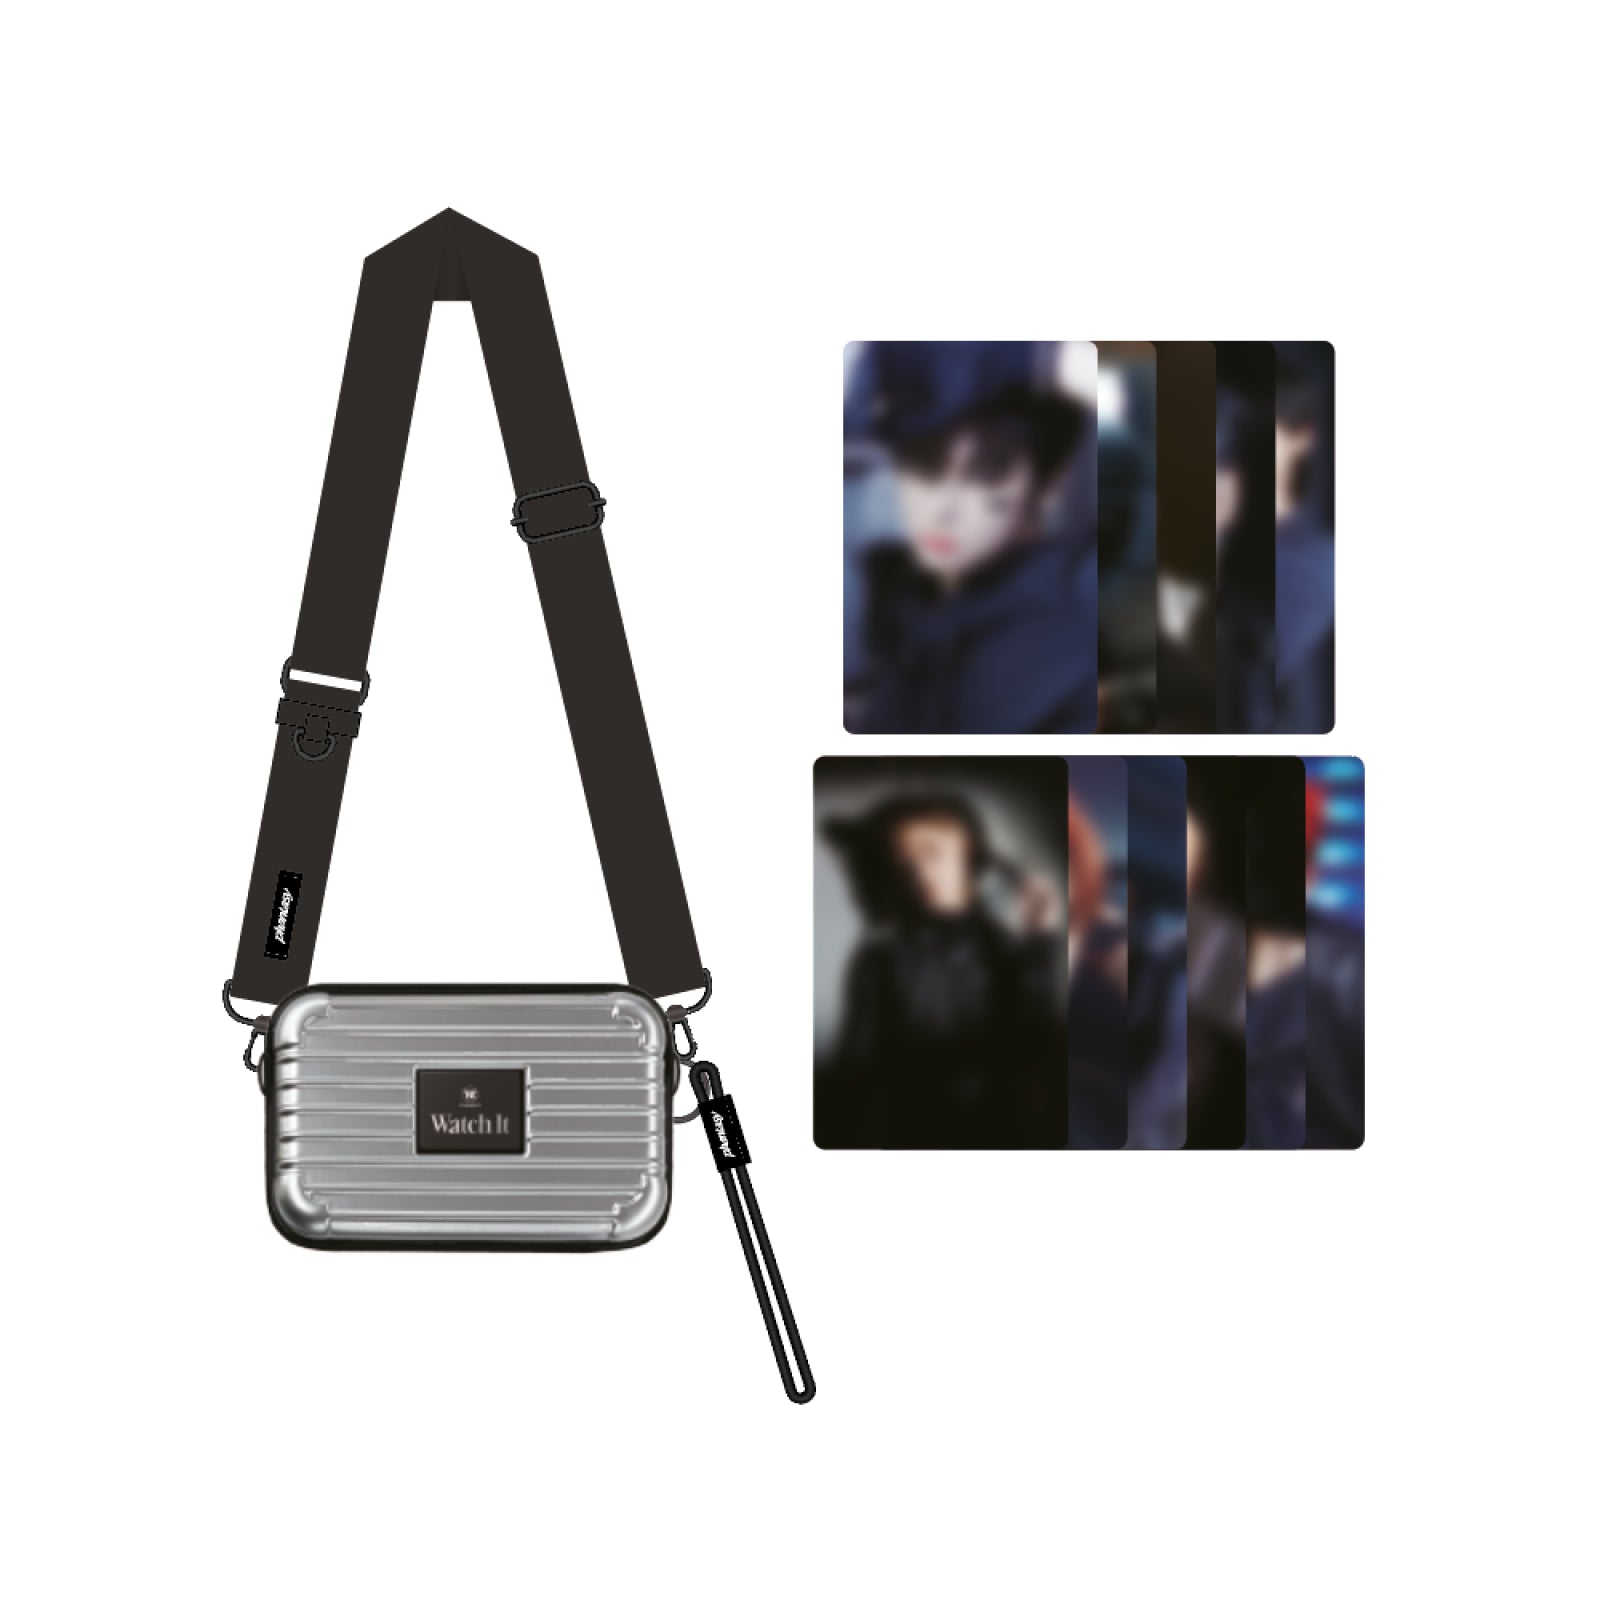 THE BOYZ - PHANTASY 2ND ALBUM OFFICIAL POP UP MD CARRIER POUCH - COKODIVE